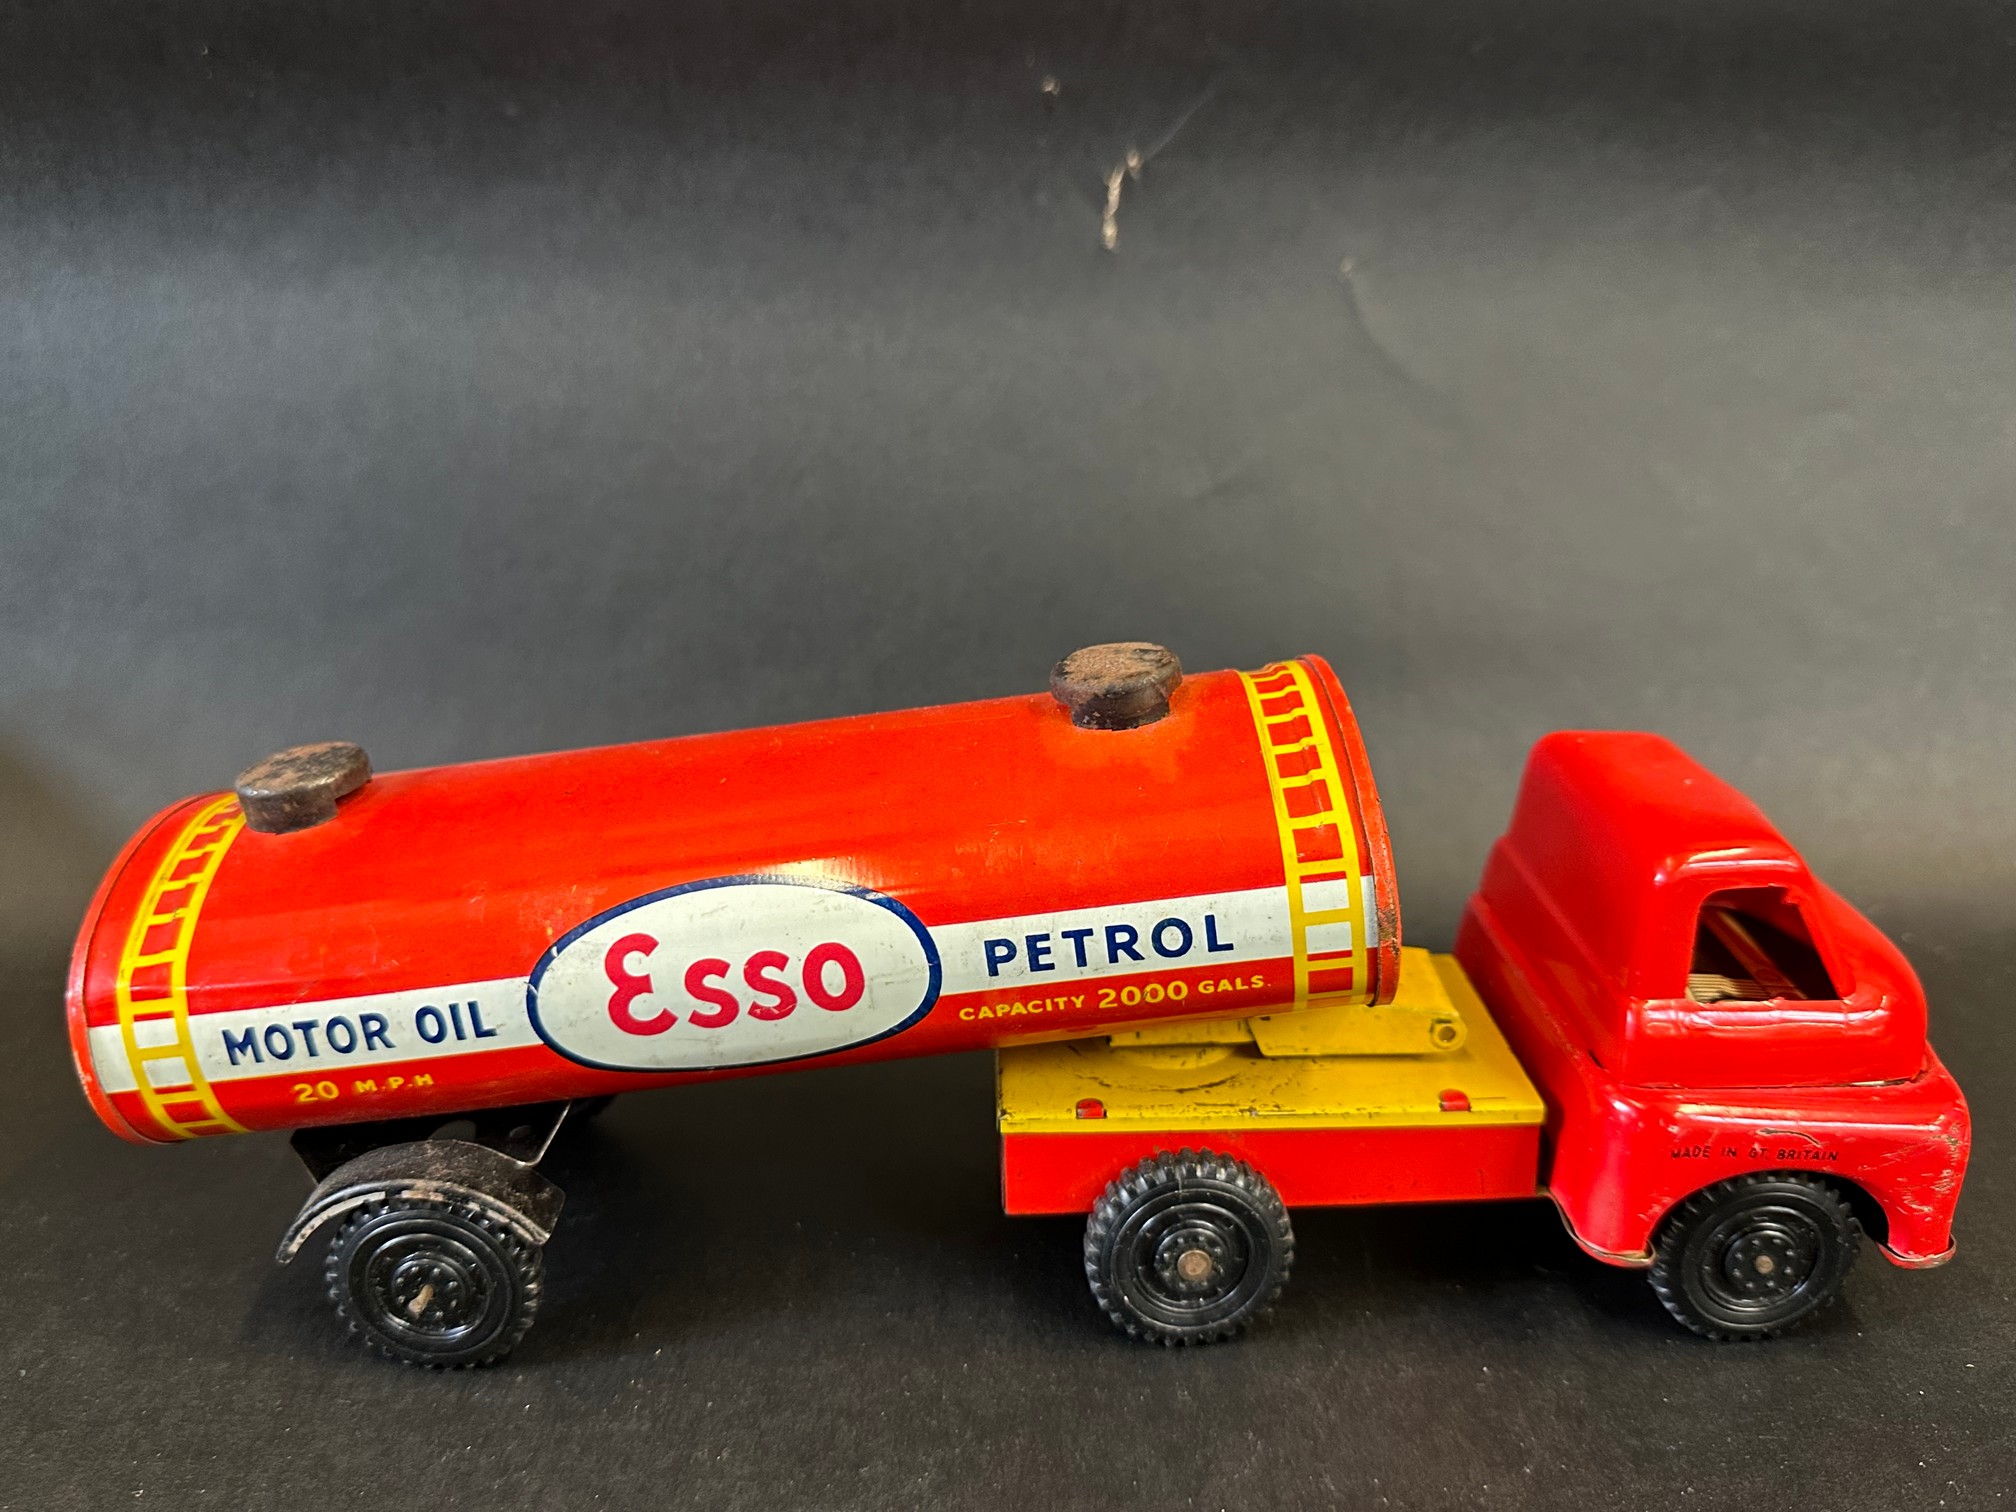 A boxed Welsotoys tinplate model of an articulated Esso petrol tanker. - Image 5 of 6